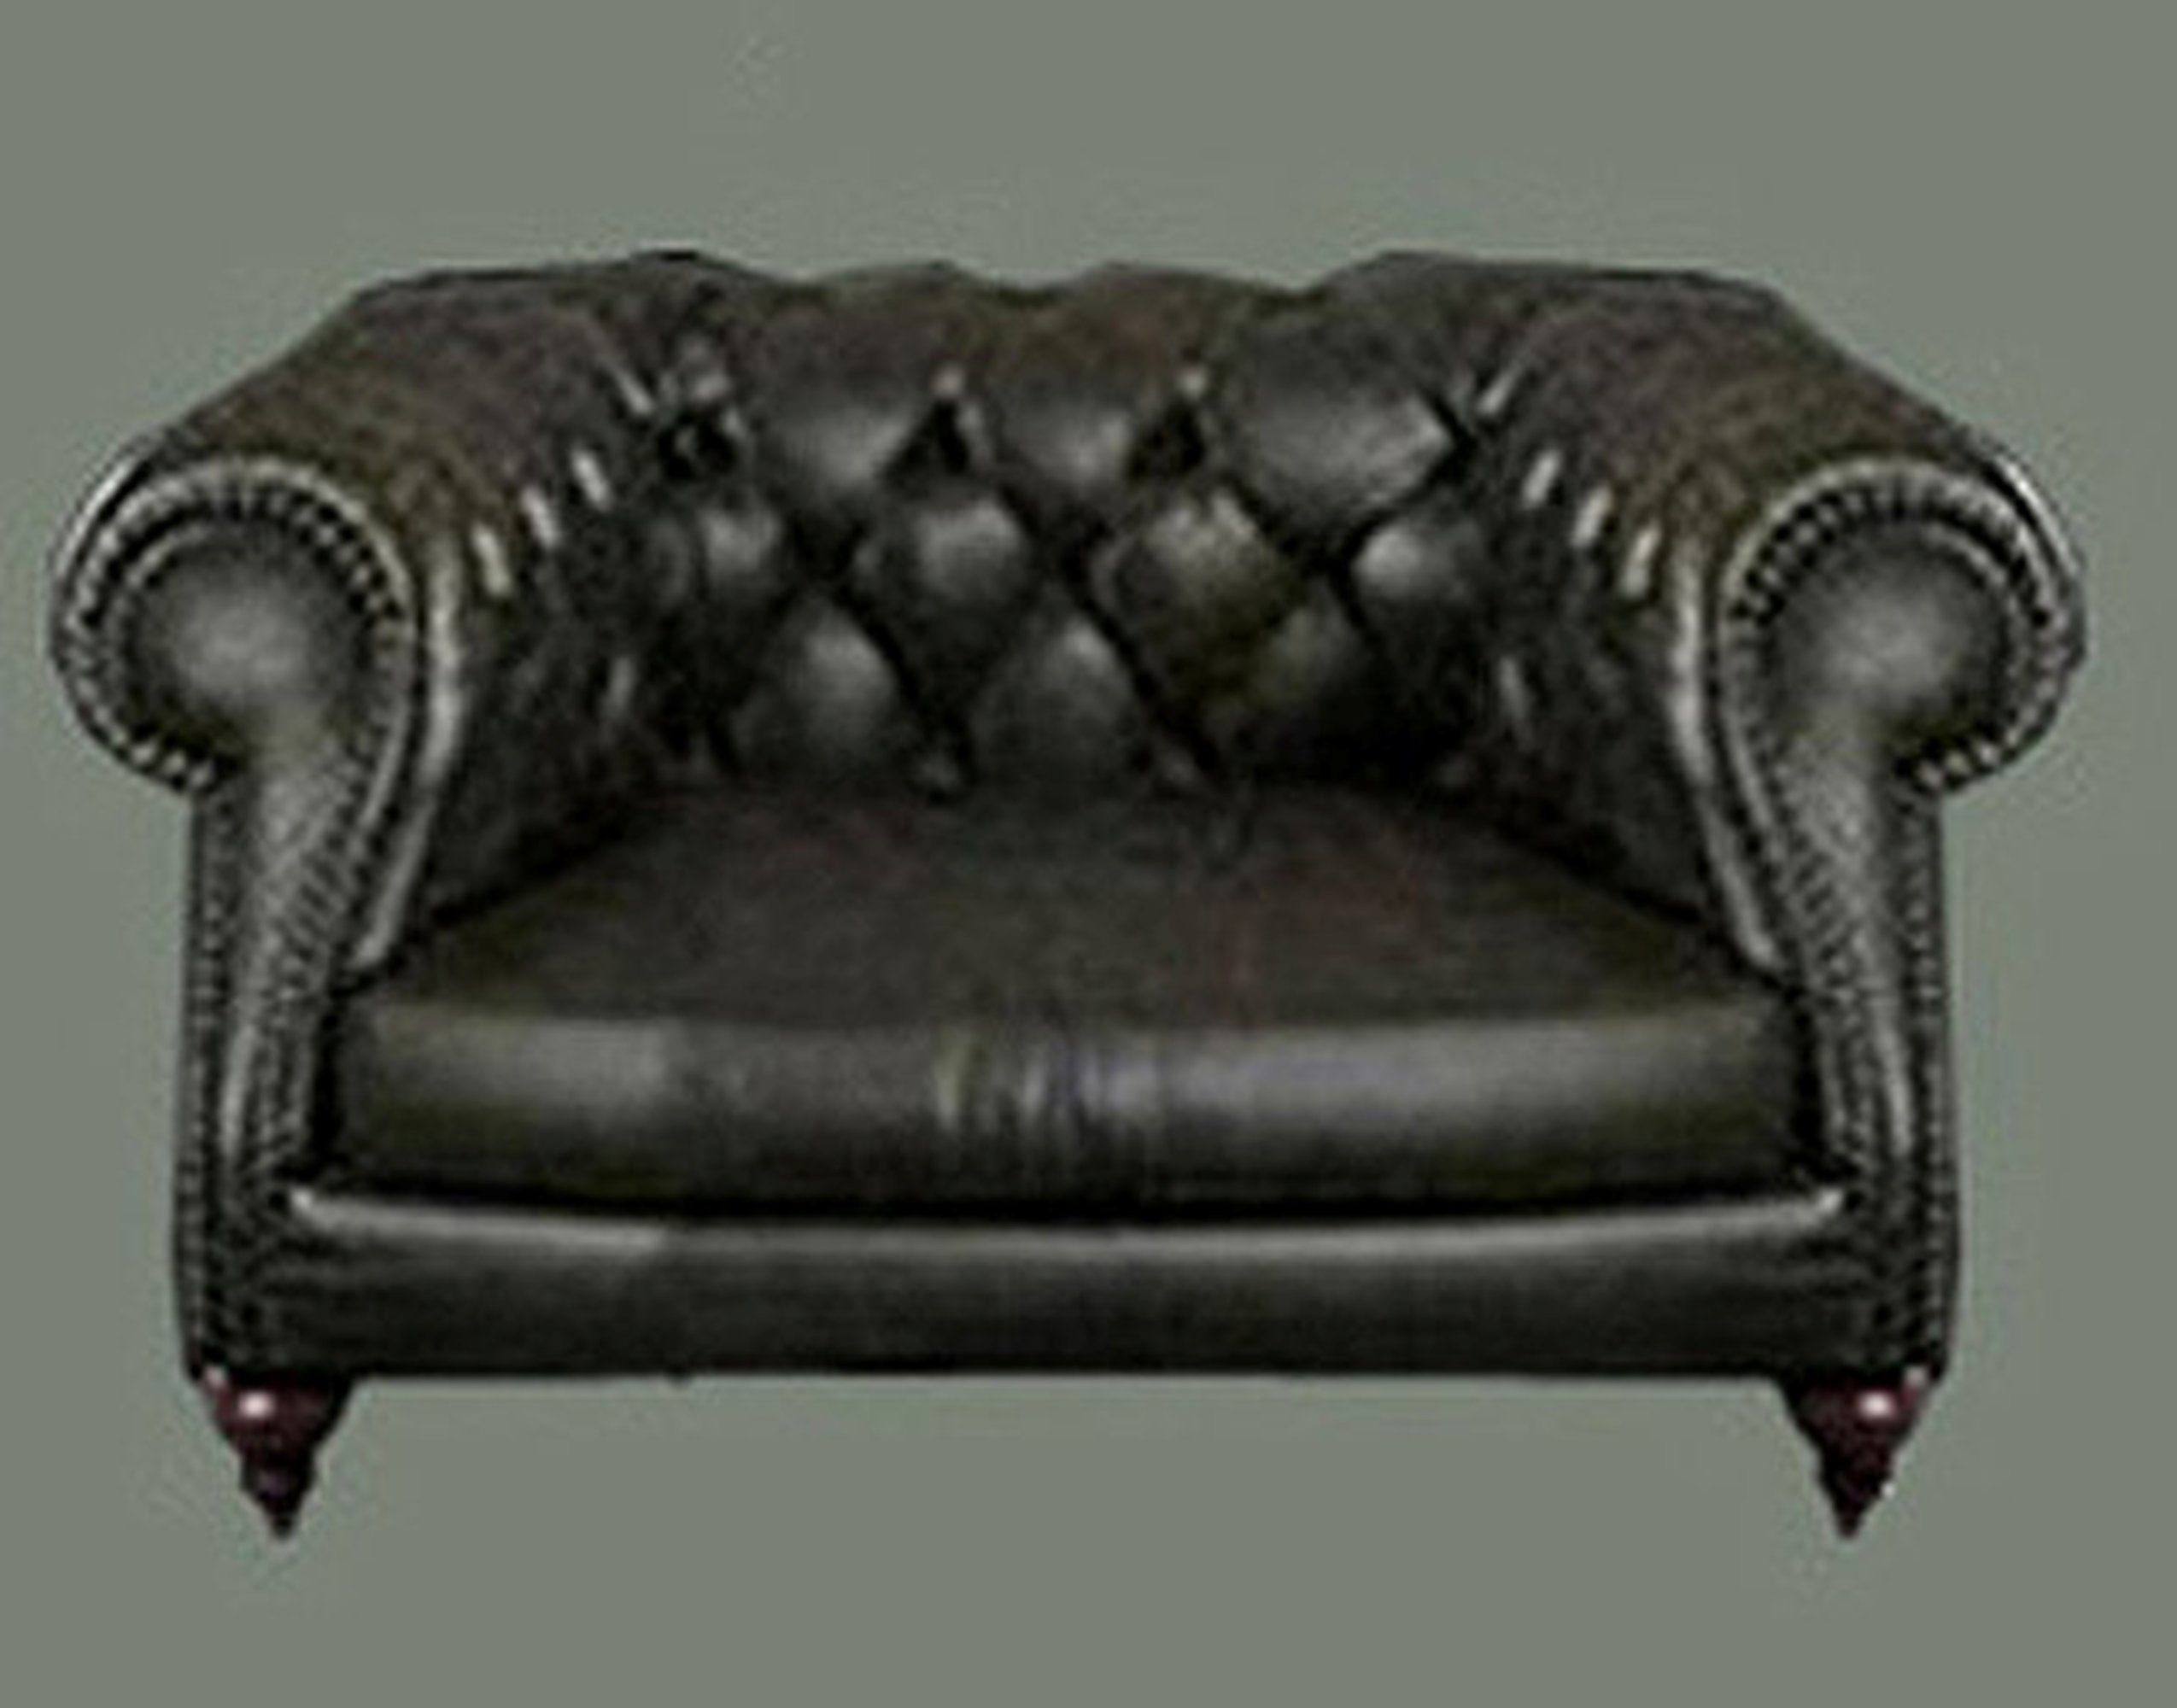 Design Chesterfield Sofort JVmoebel Couch Europe Polster Textil Couch (Sessel), Sessel Luxus Chesterfield-Sessel Made in